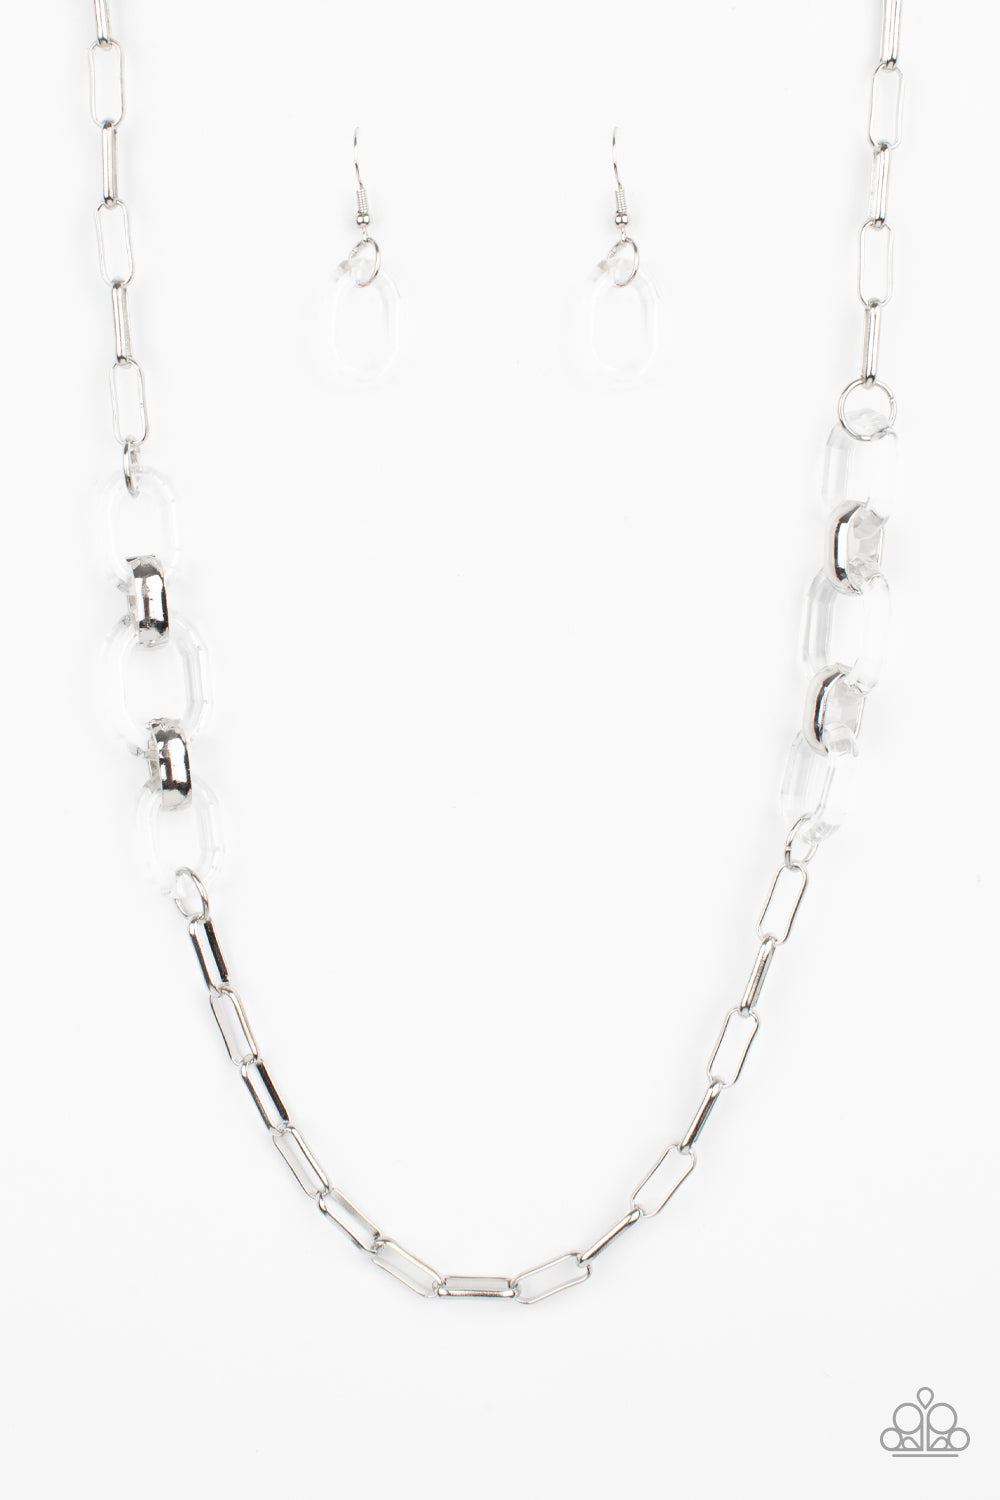 Have I Made Myself Clear? - White Necklace - Paparazzi Accessories 